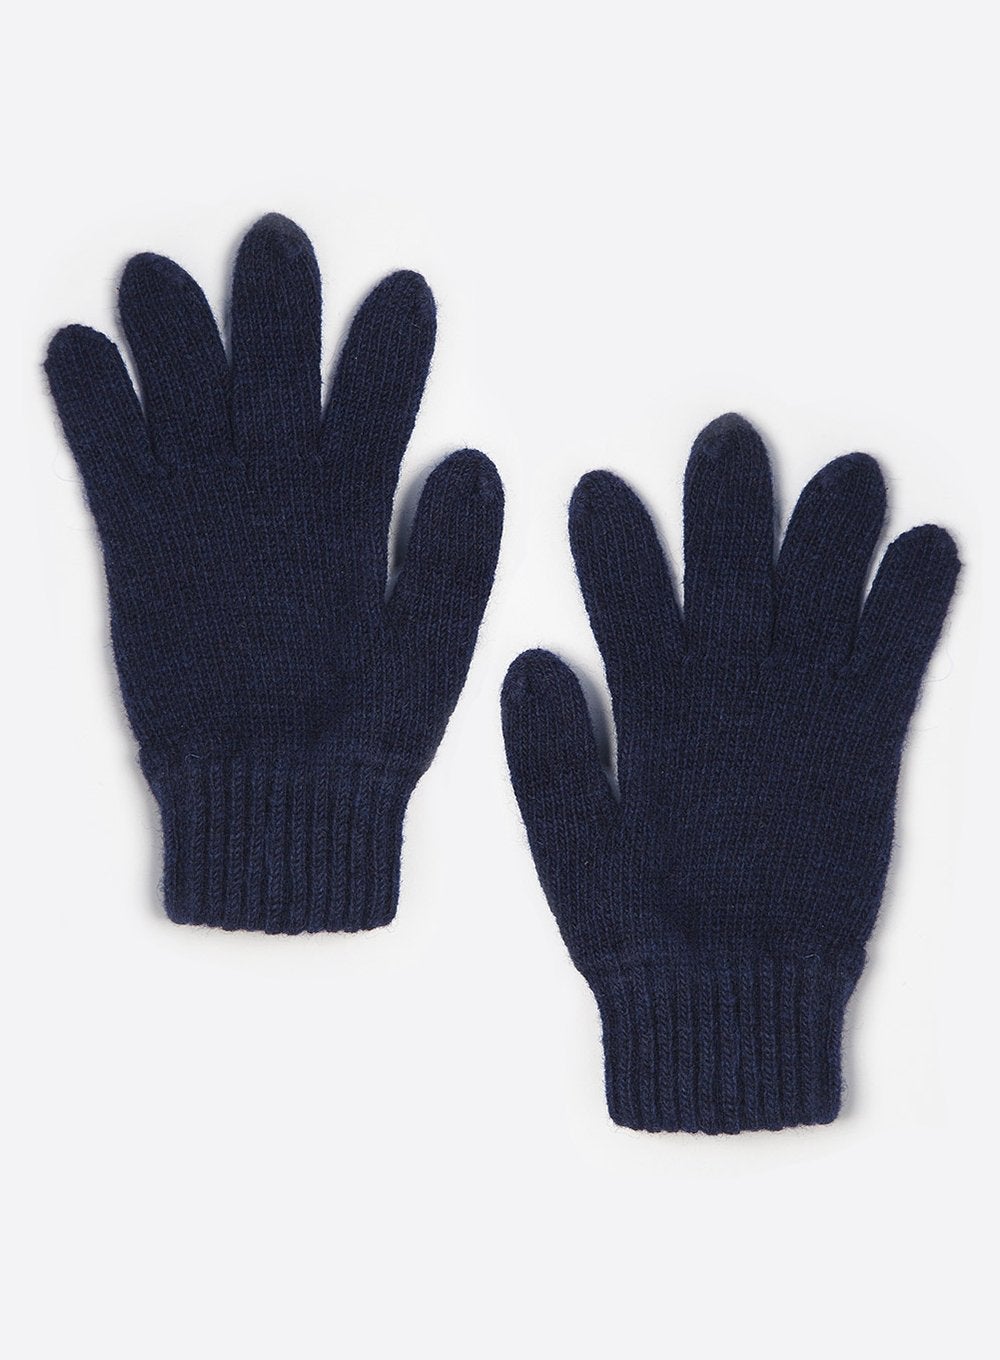 Chelsea Clothing Company Gloves Gloves in Navy